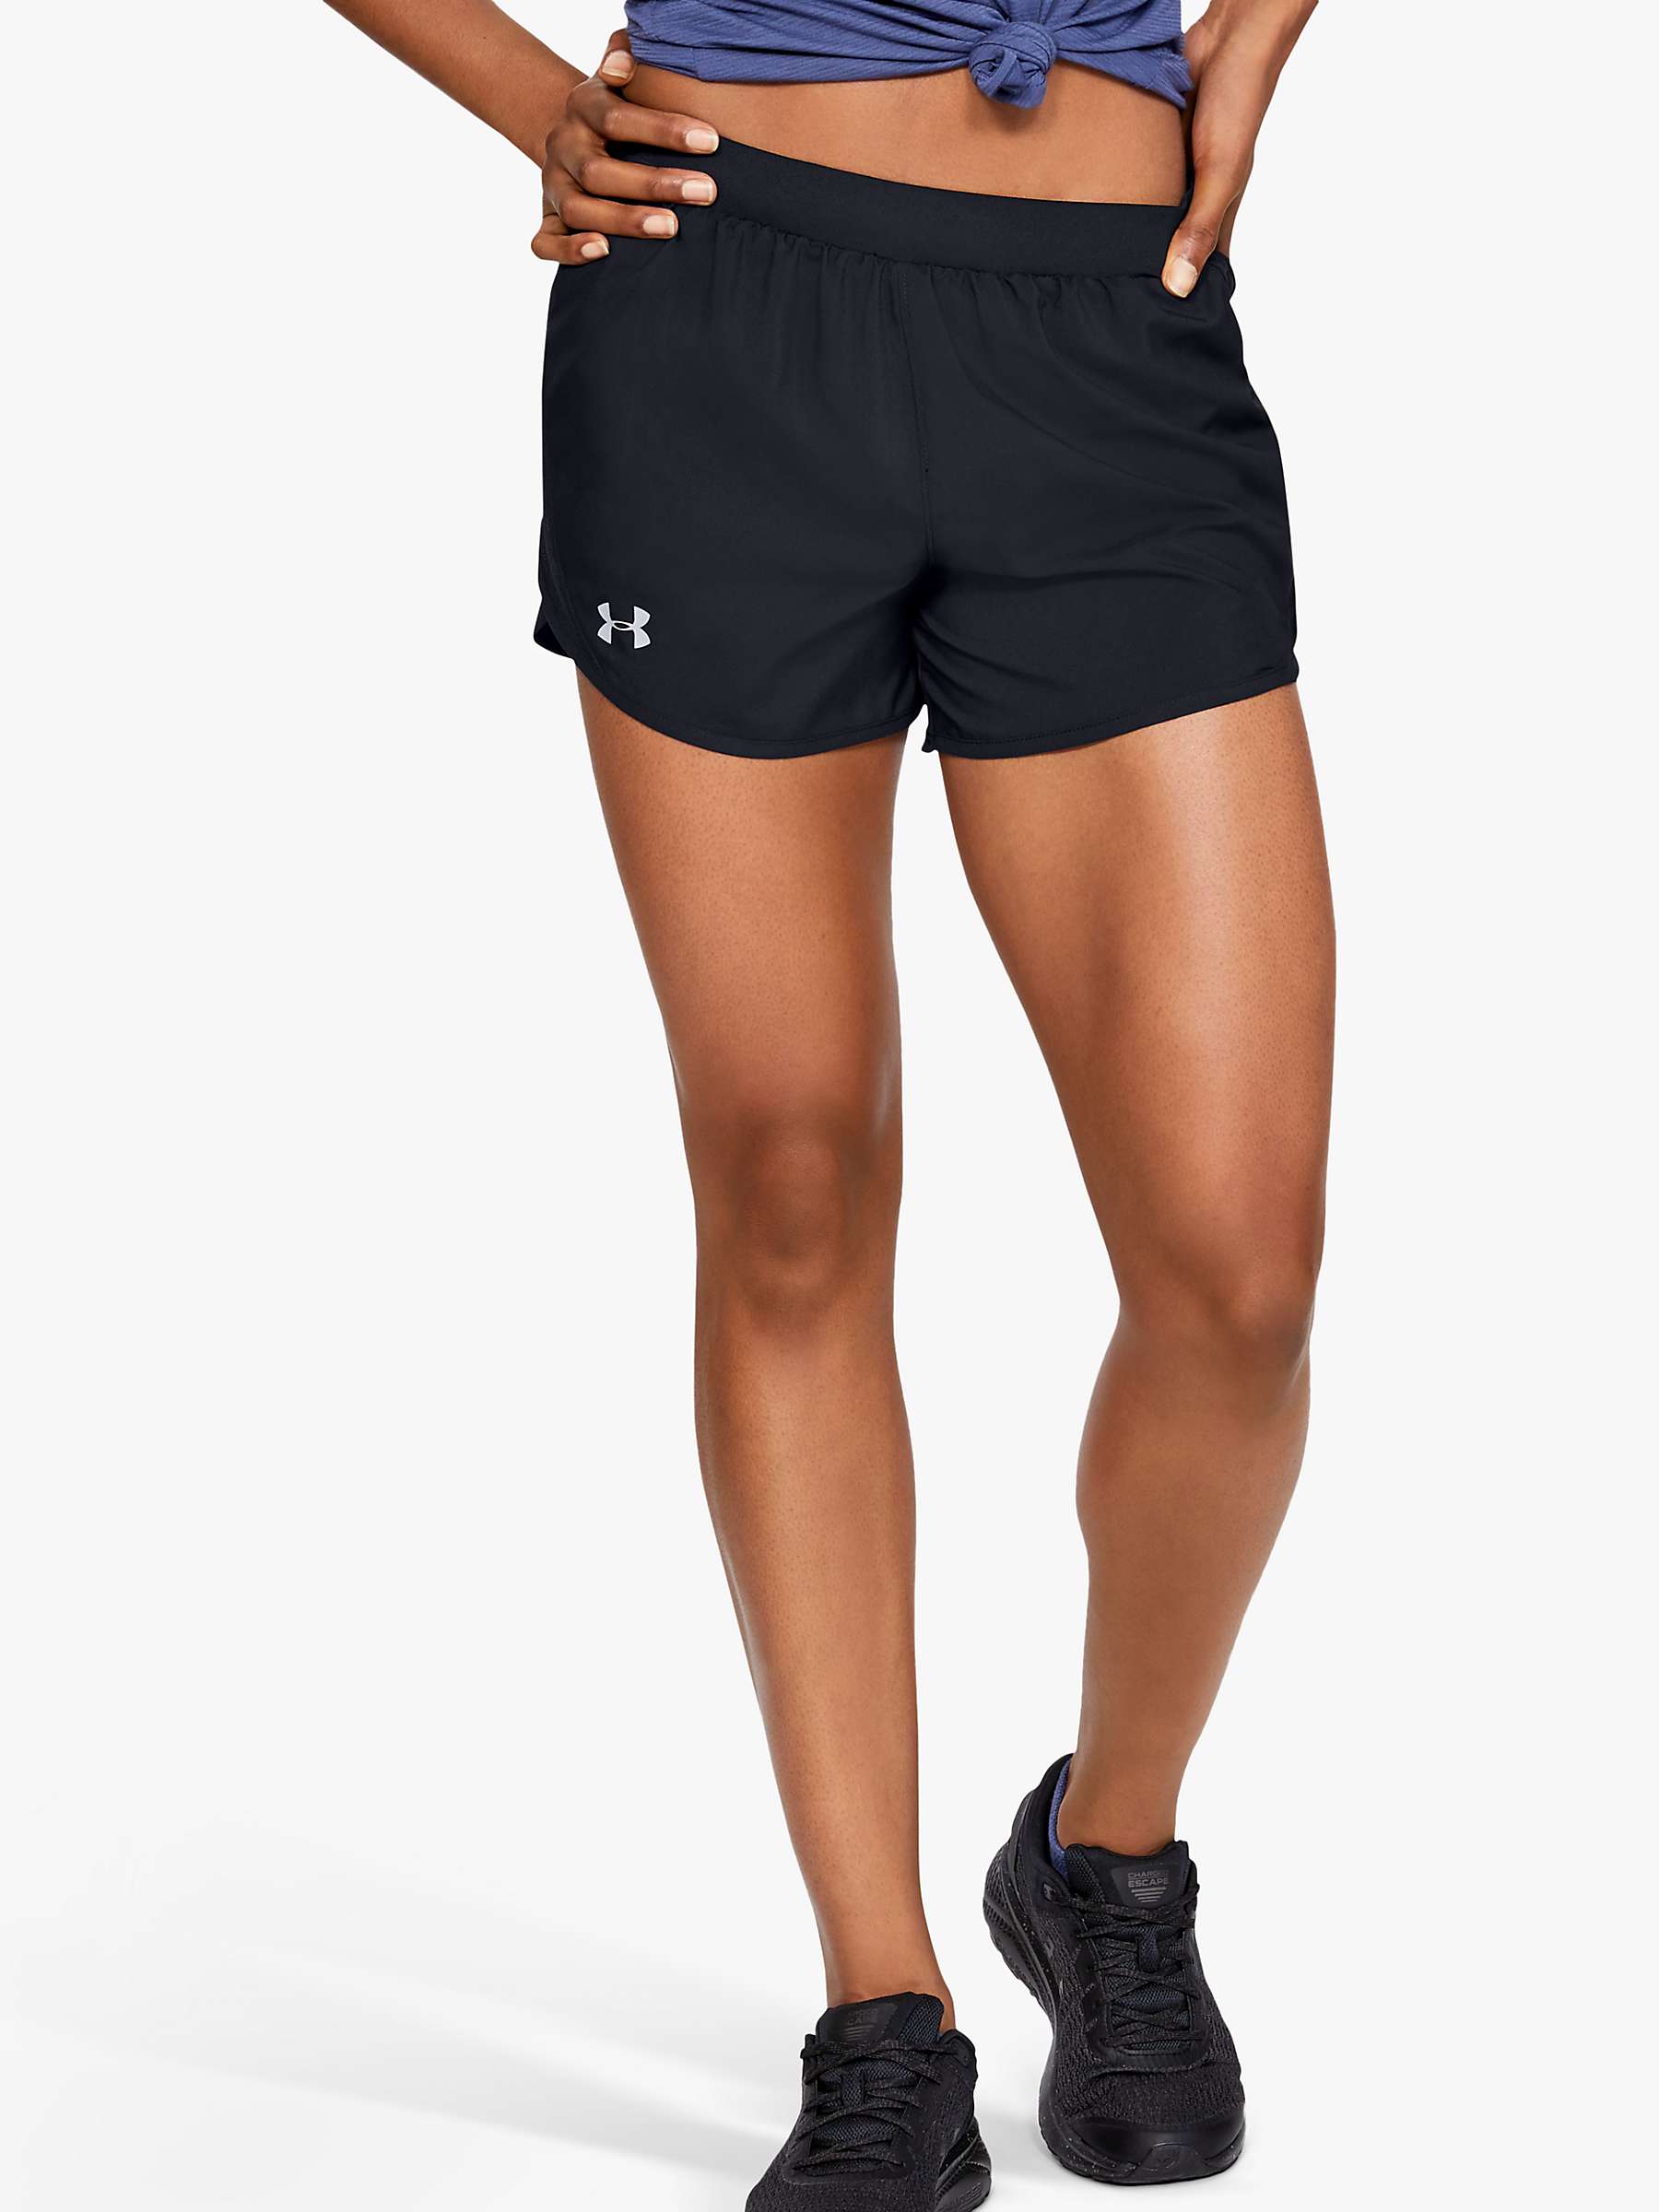 Under Armour Girls' Fly by Shorts 